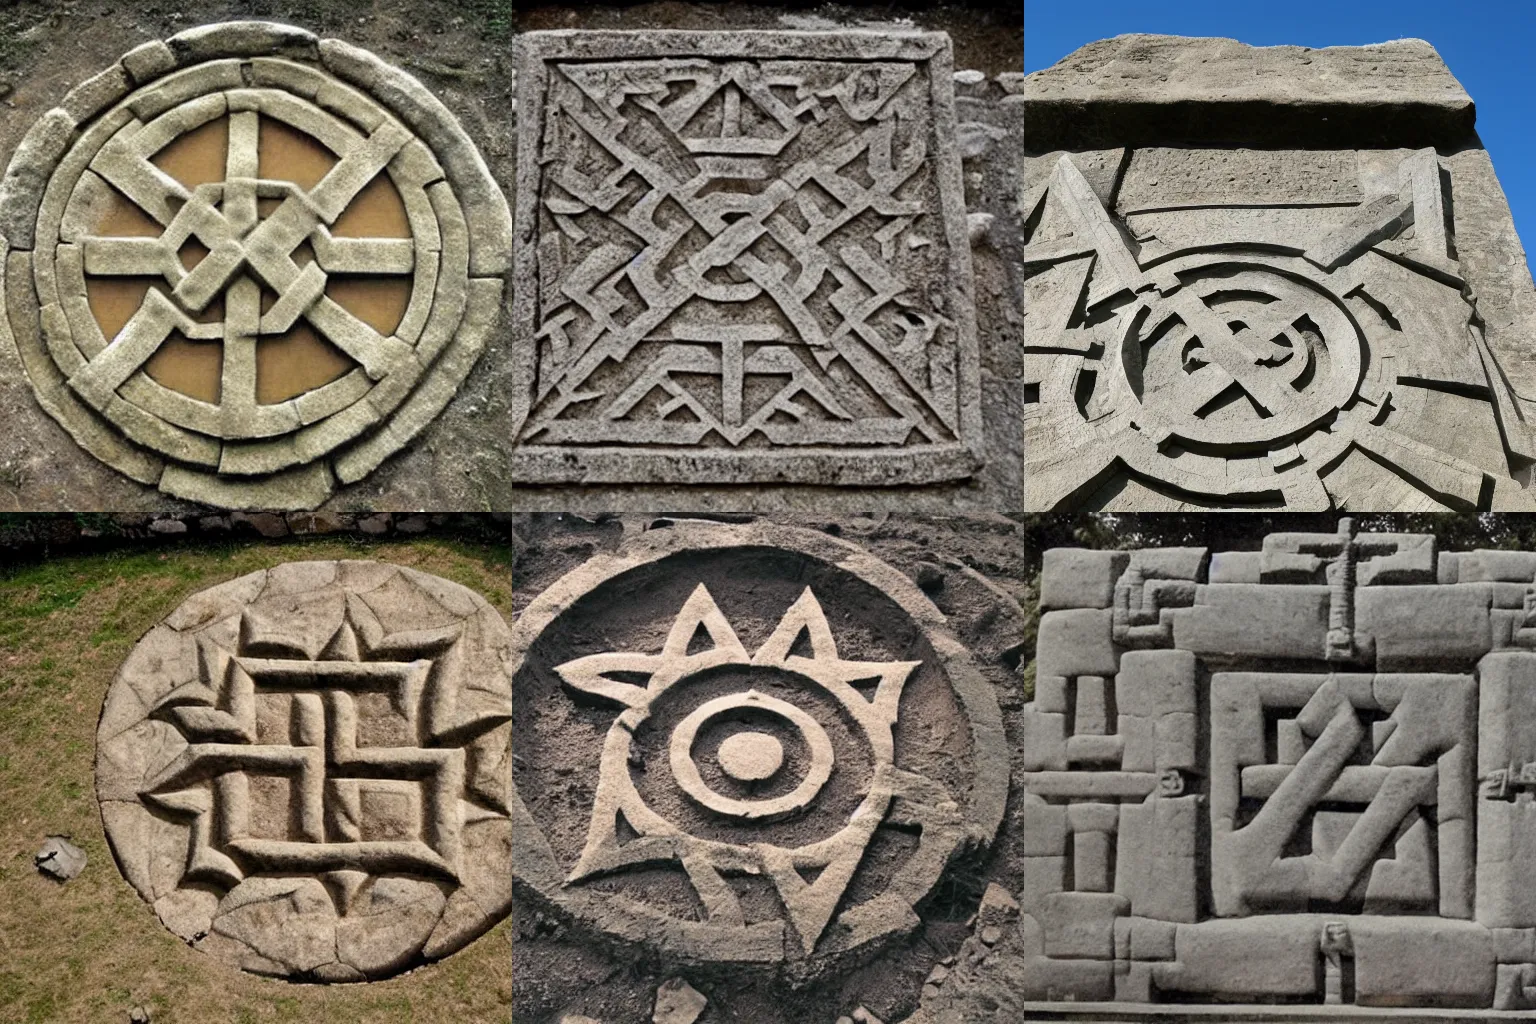 Prompt: a photo which shows a large swastika crafted in the masonwork of an ancient megalithic temple